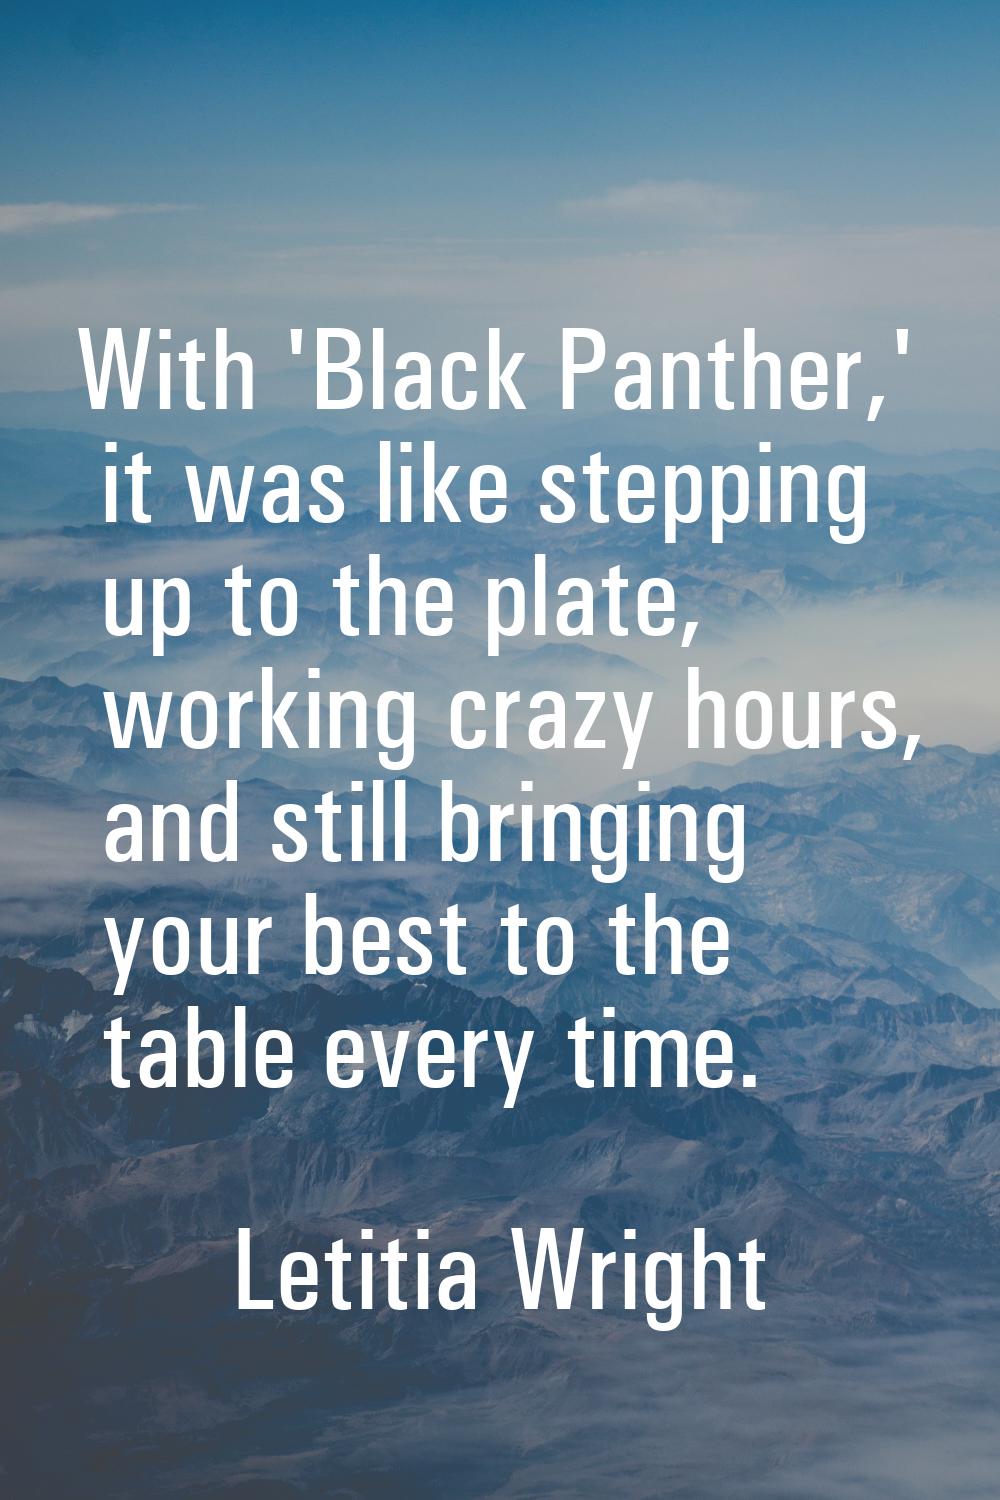 With 'Black Panther,' it was like stepping up to the plate, working crazy hours, and still bringing